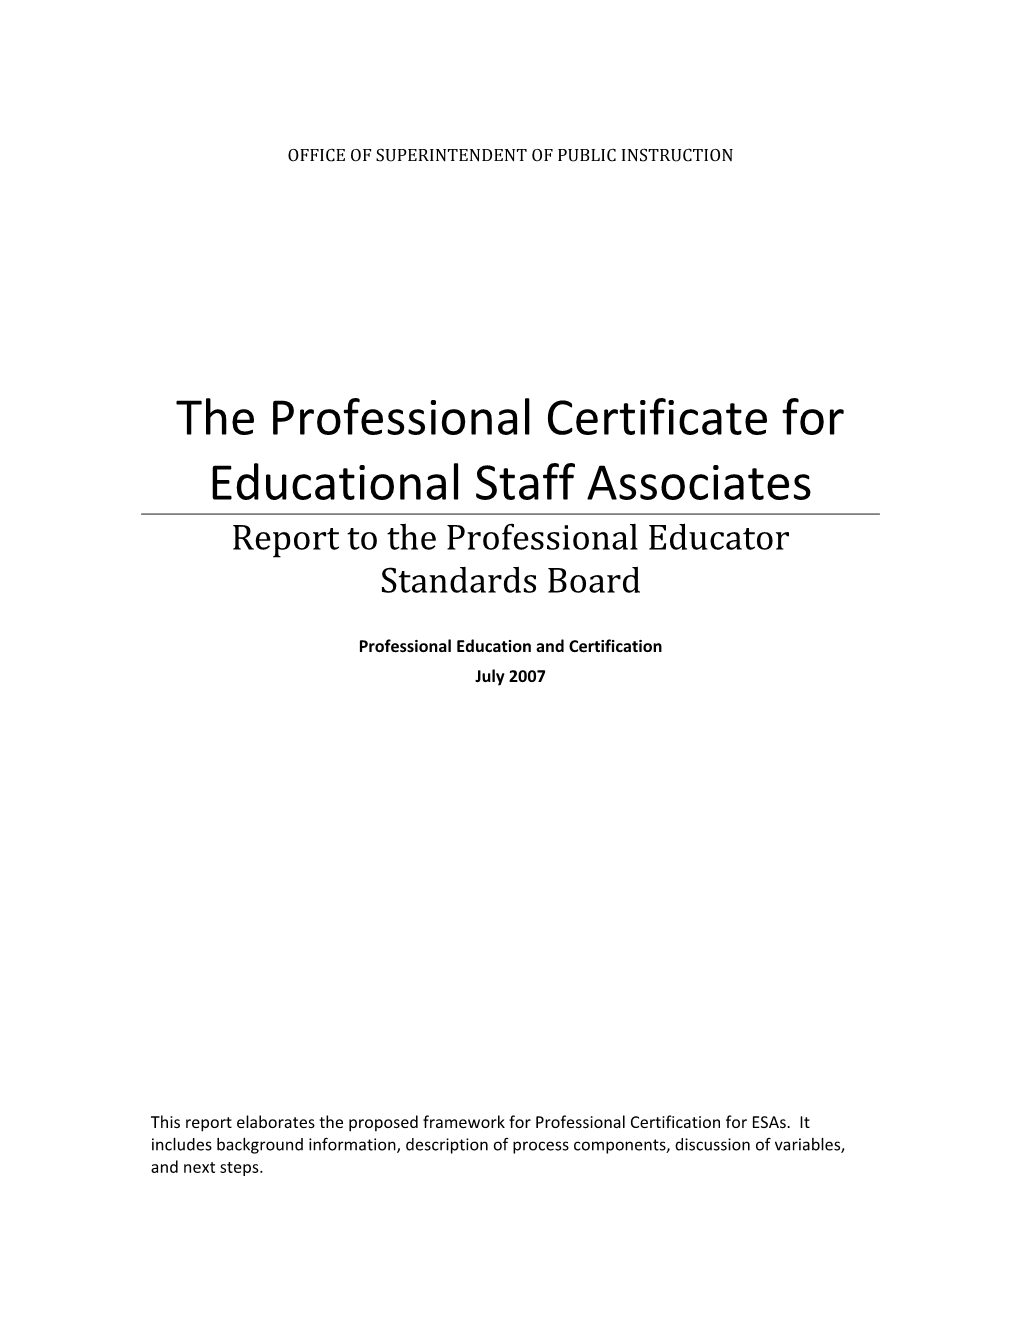 The Professional Certificate for Educational Staff Associates